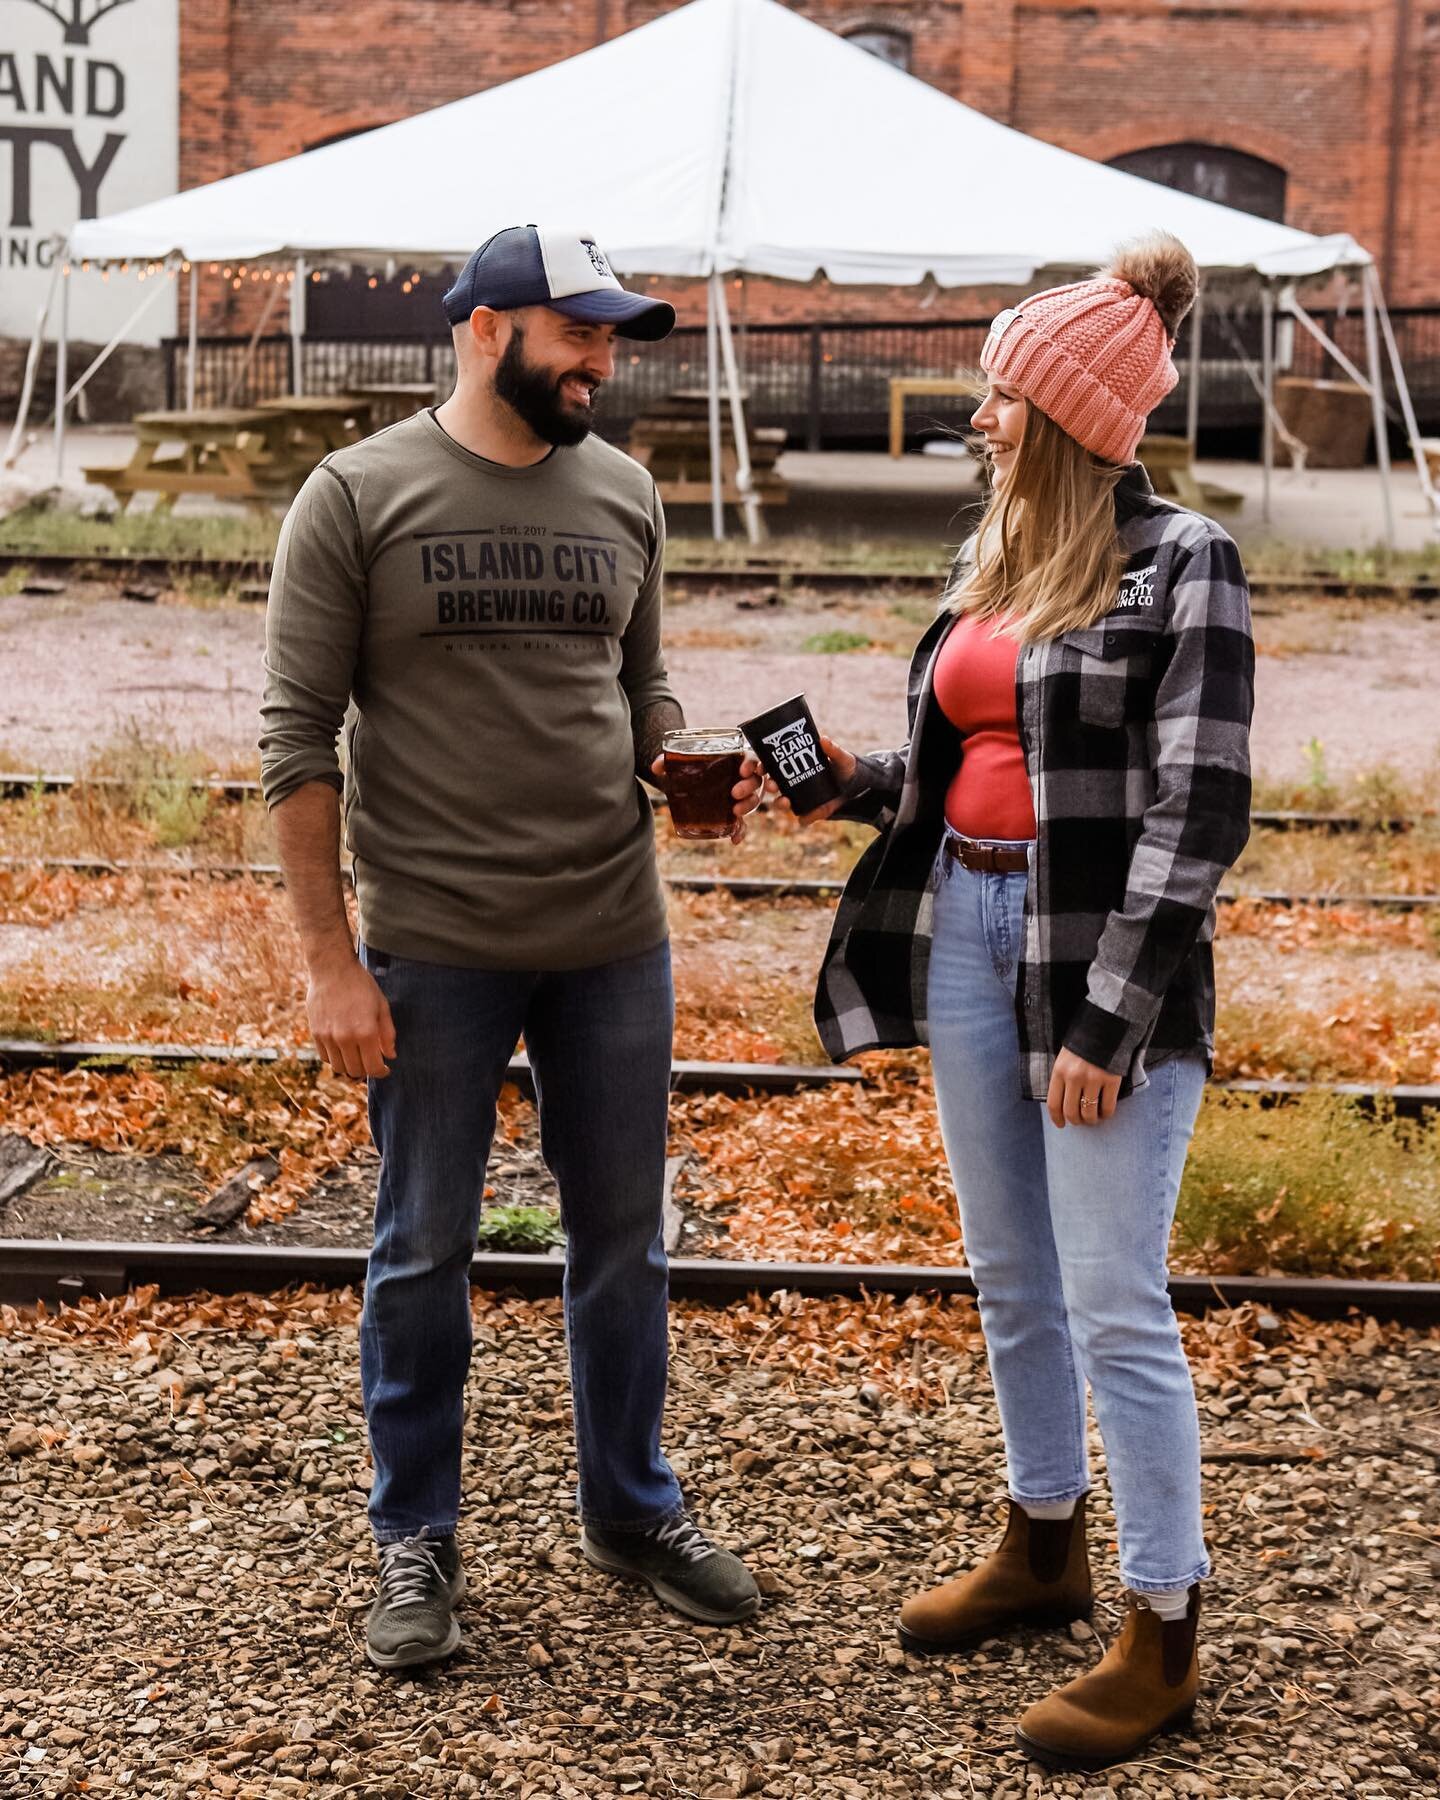 Chad and Marissa are feelin cozy in this fall weather! Let ICBC help you with those fall apparel needs. A new waffle shirt and winter hat will be the perfect addition to your wardrobe.